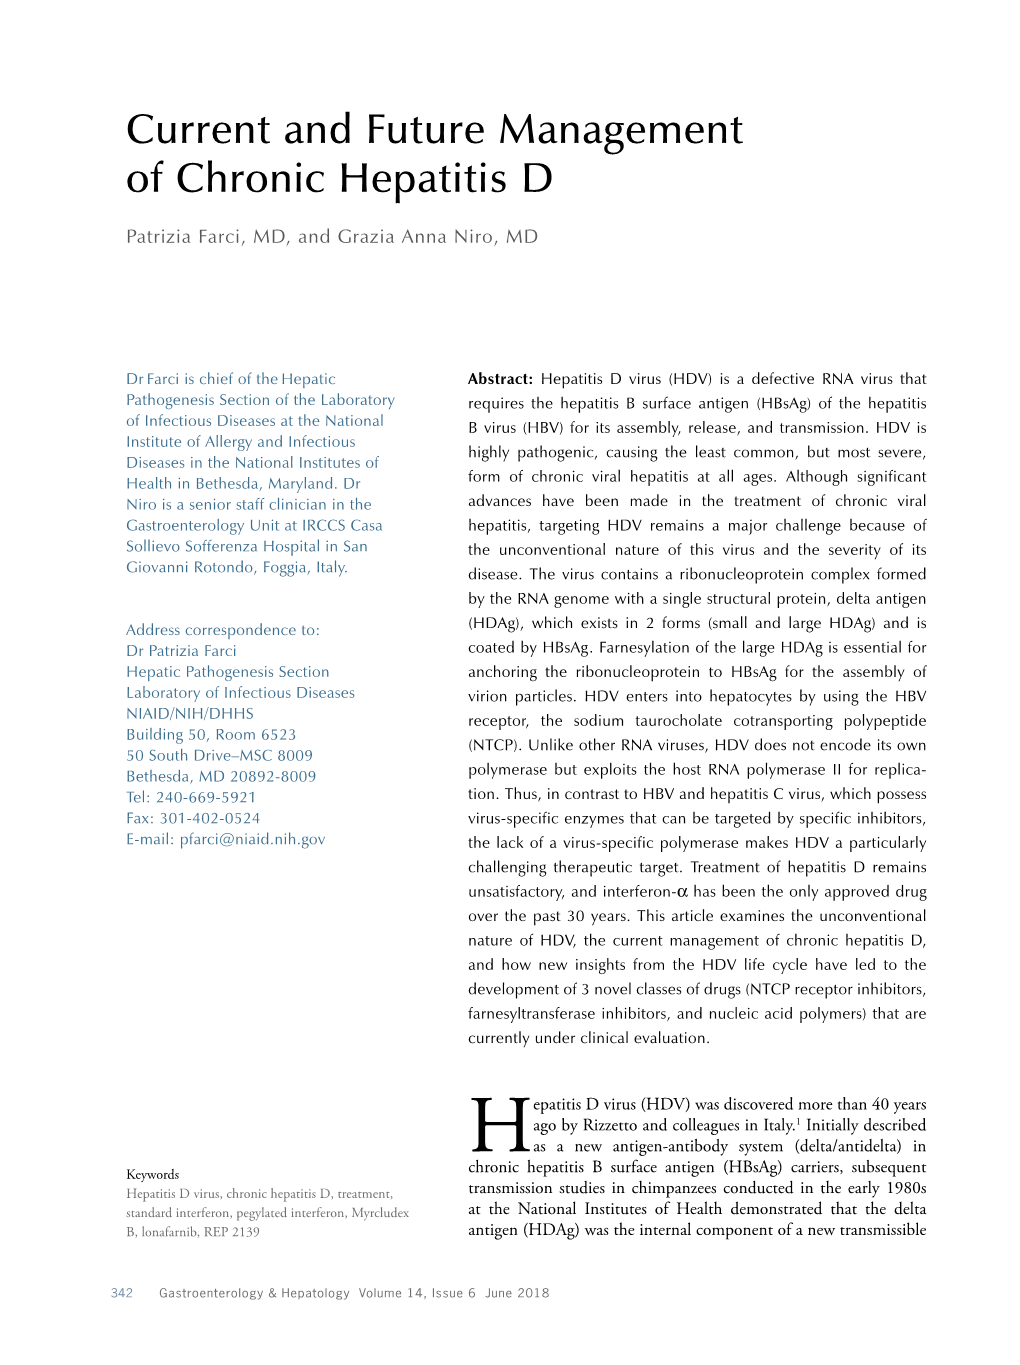 Current and Future Management of Chronic Hepatitis D